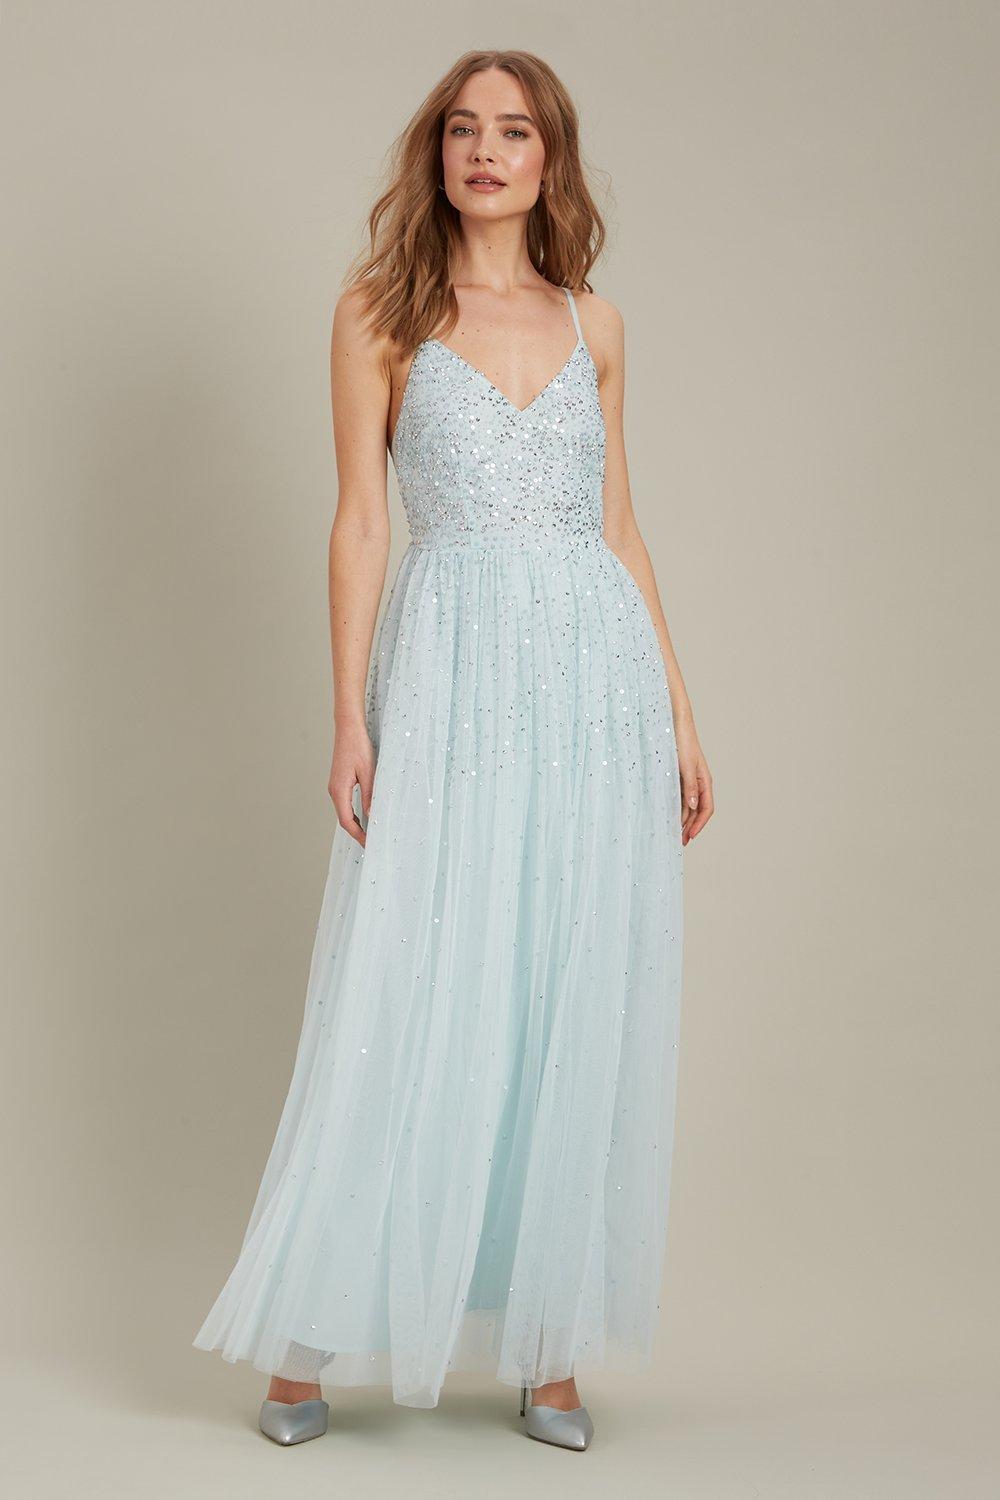 Women's Embellished Strappy Tulle Maxi Dress - mint - 8